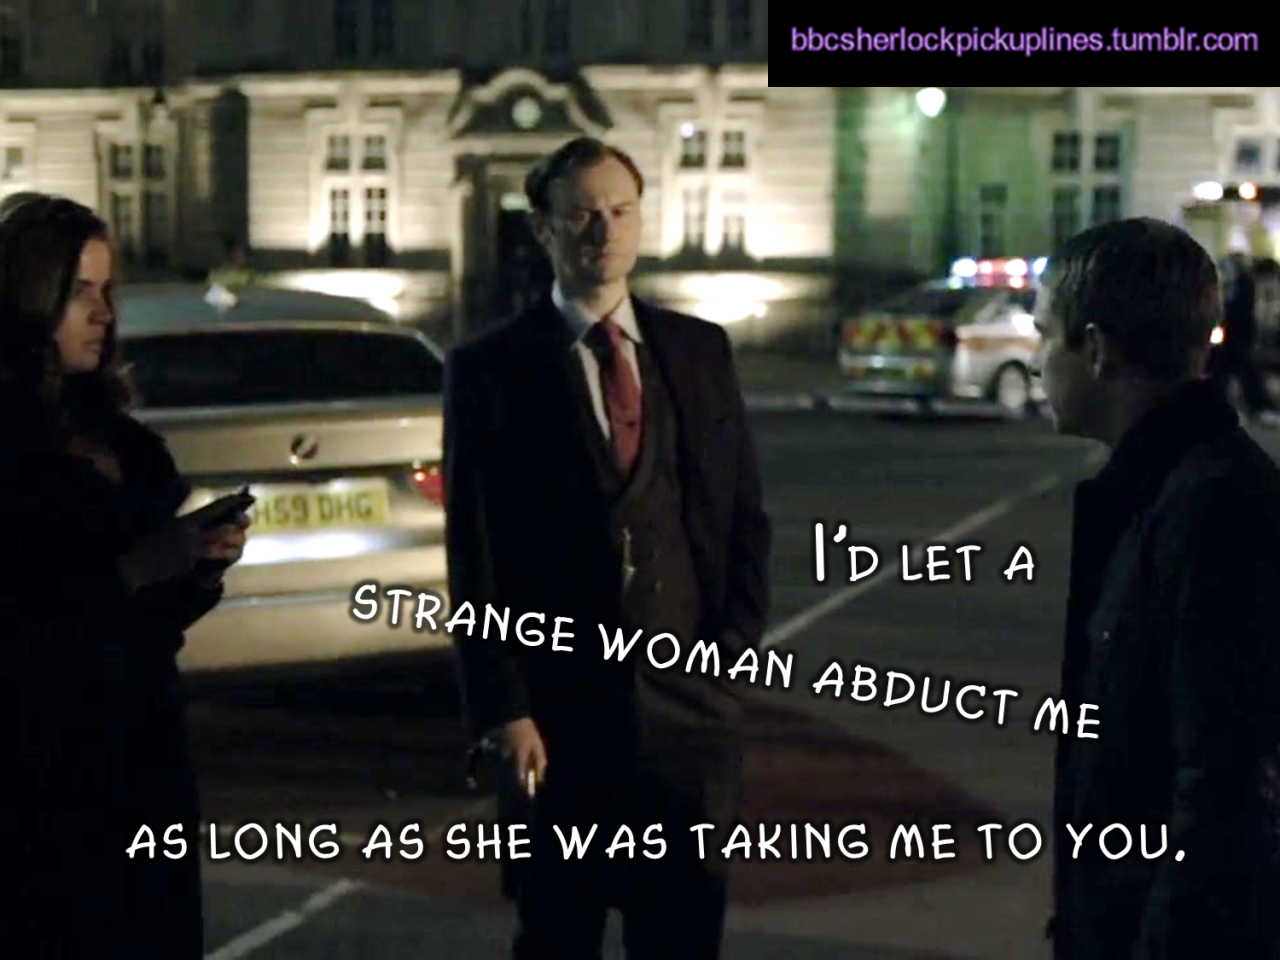 &ldquo;I&rsquo;d let a strange woman abduct me as long as she was taking